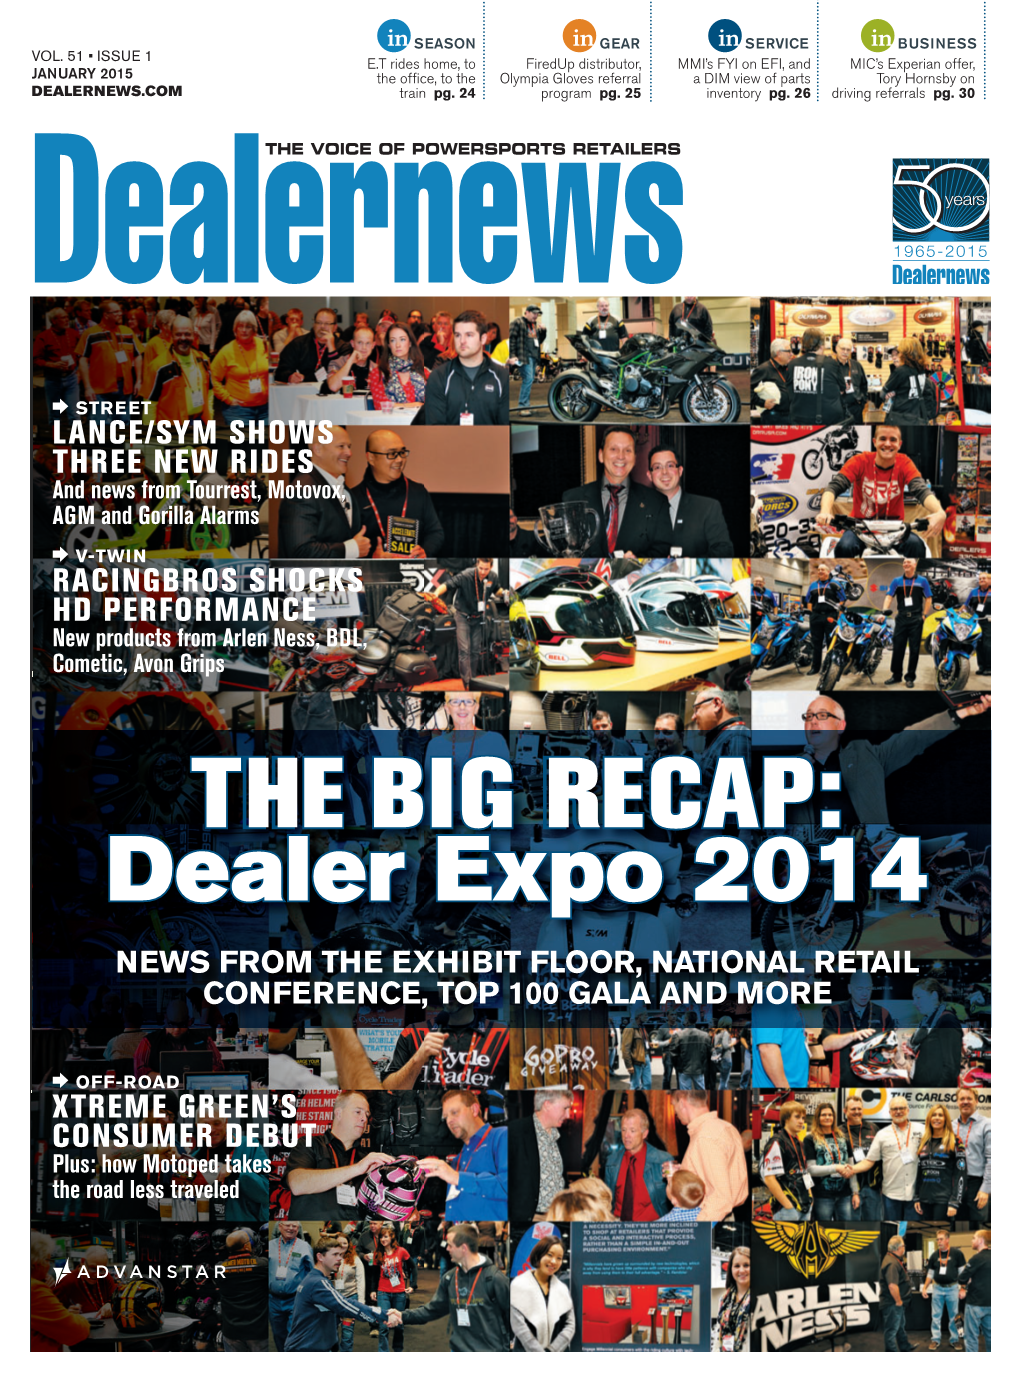 THE BIG RECAP: Dealer Expo 2014 NEWS from the EXHIBIT FLOOR, NATIONAL RETAIL CONFERENCE, TOP 100 GALA and MORE